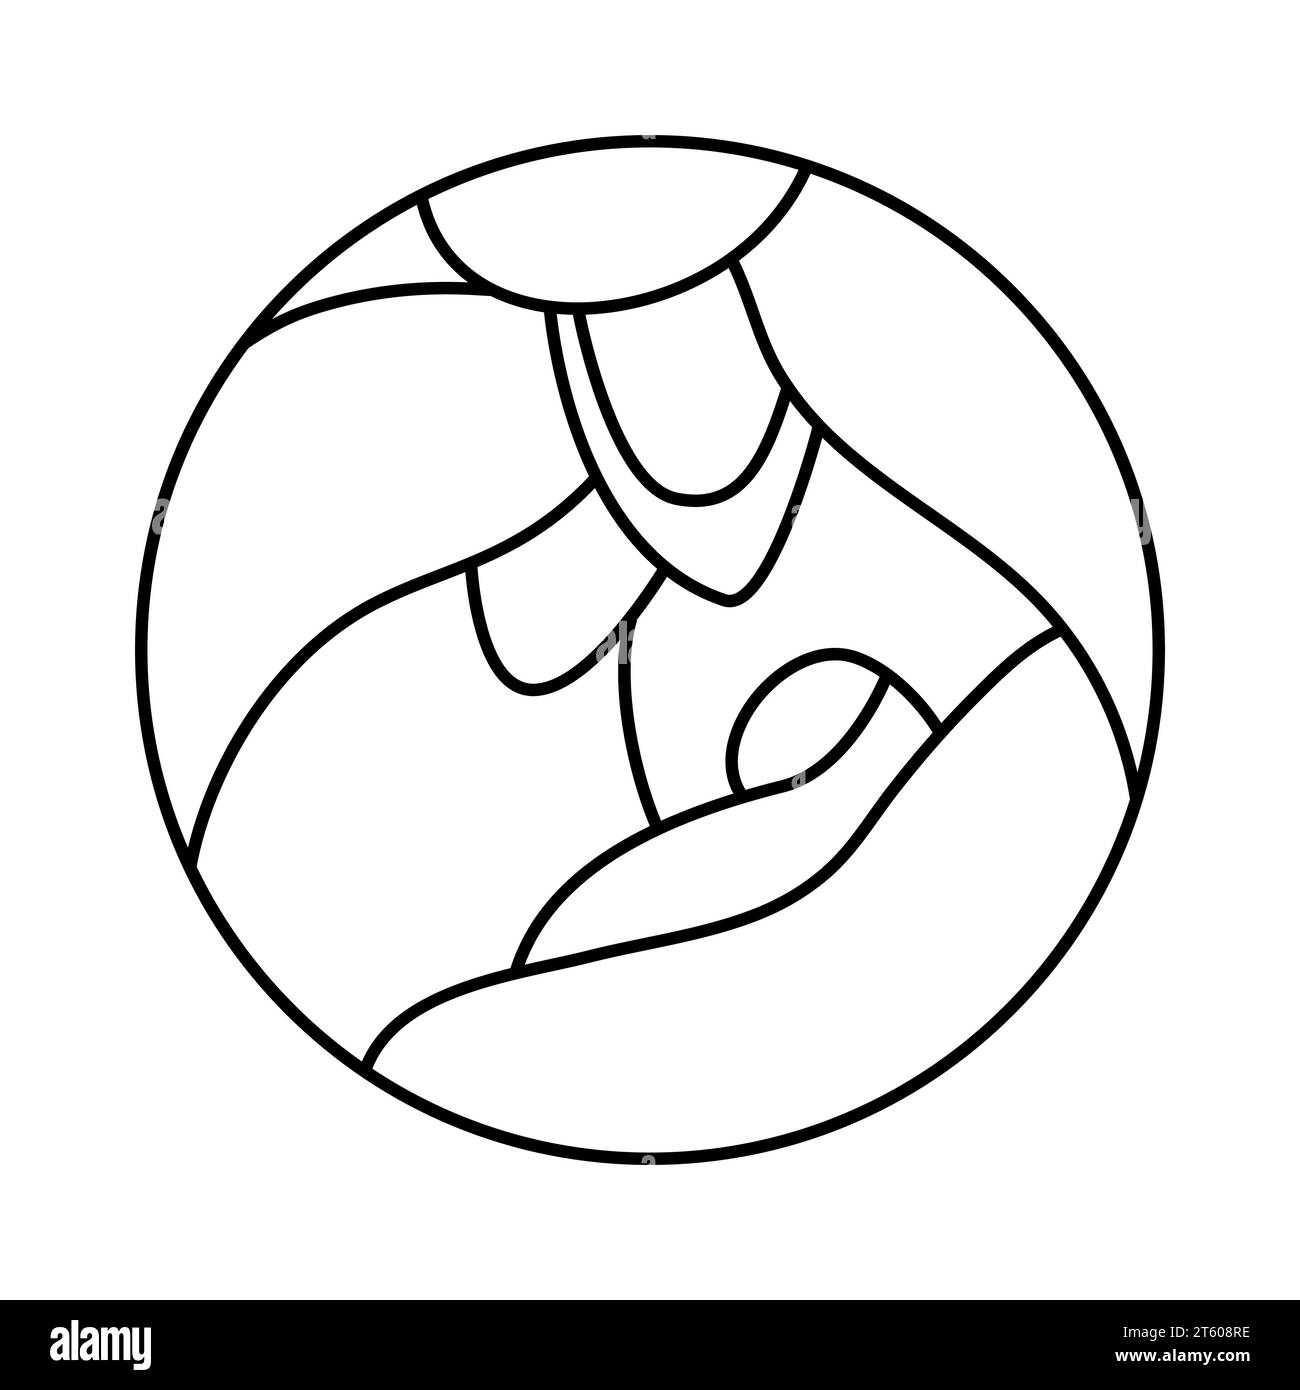 Christmas Vector Christian icon baby Jesus with Joseph. Religious Nativity Scene of round Logo illustration sketch. Doodle hand drawn with black lines Stock Vector